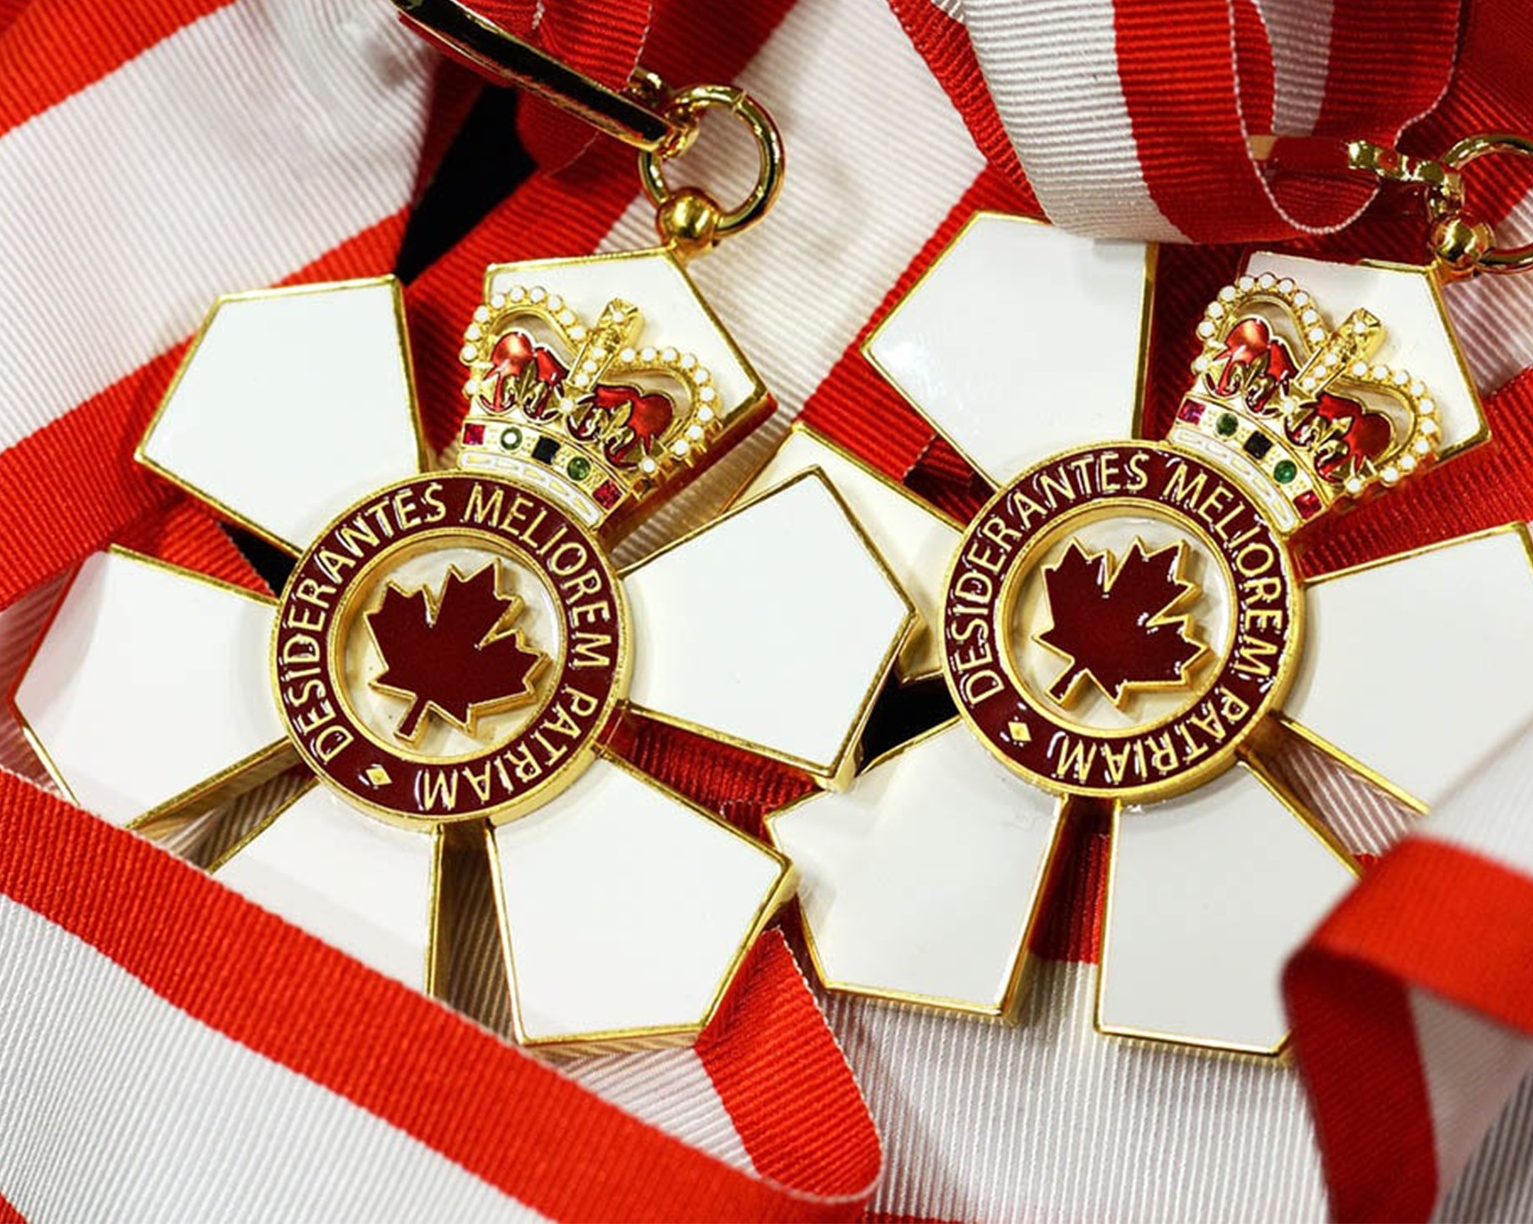 3 Concordians named to the Order of Canada